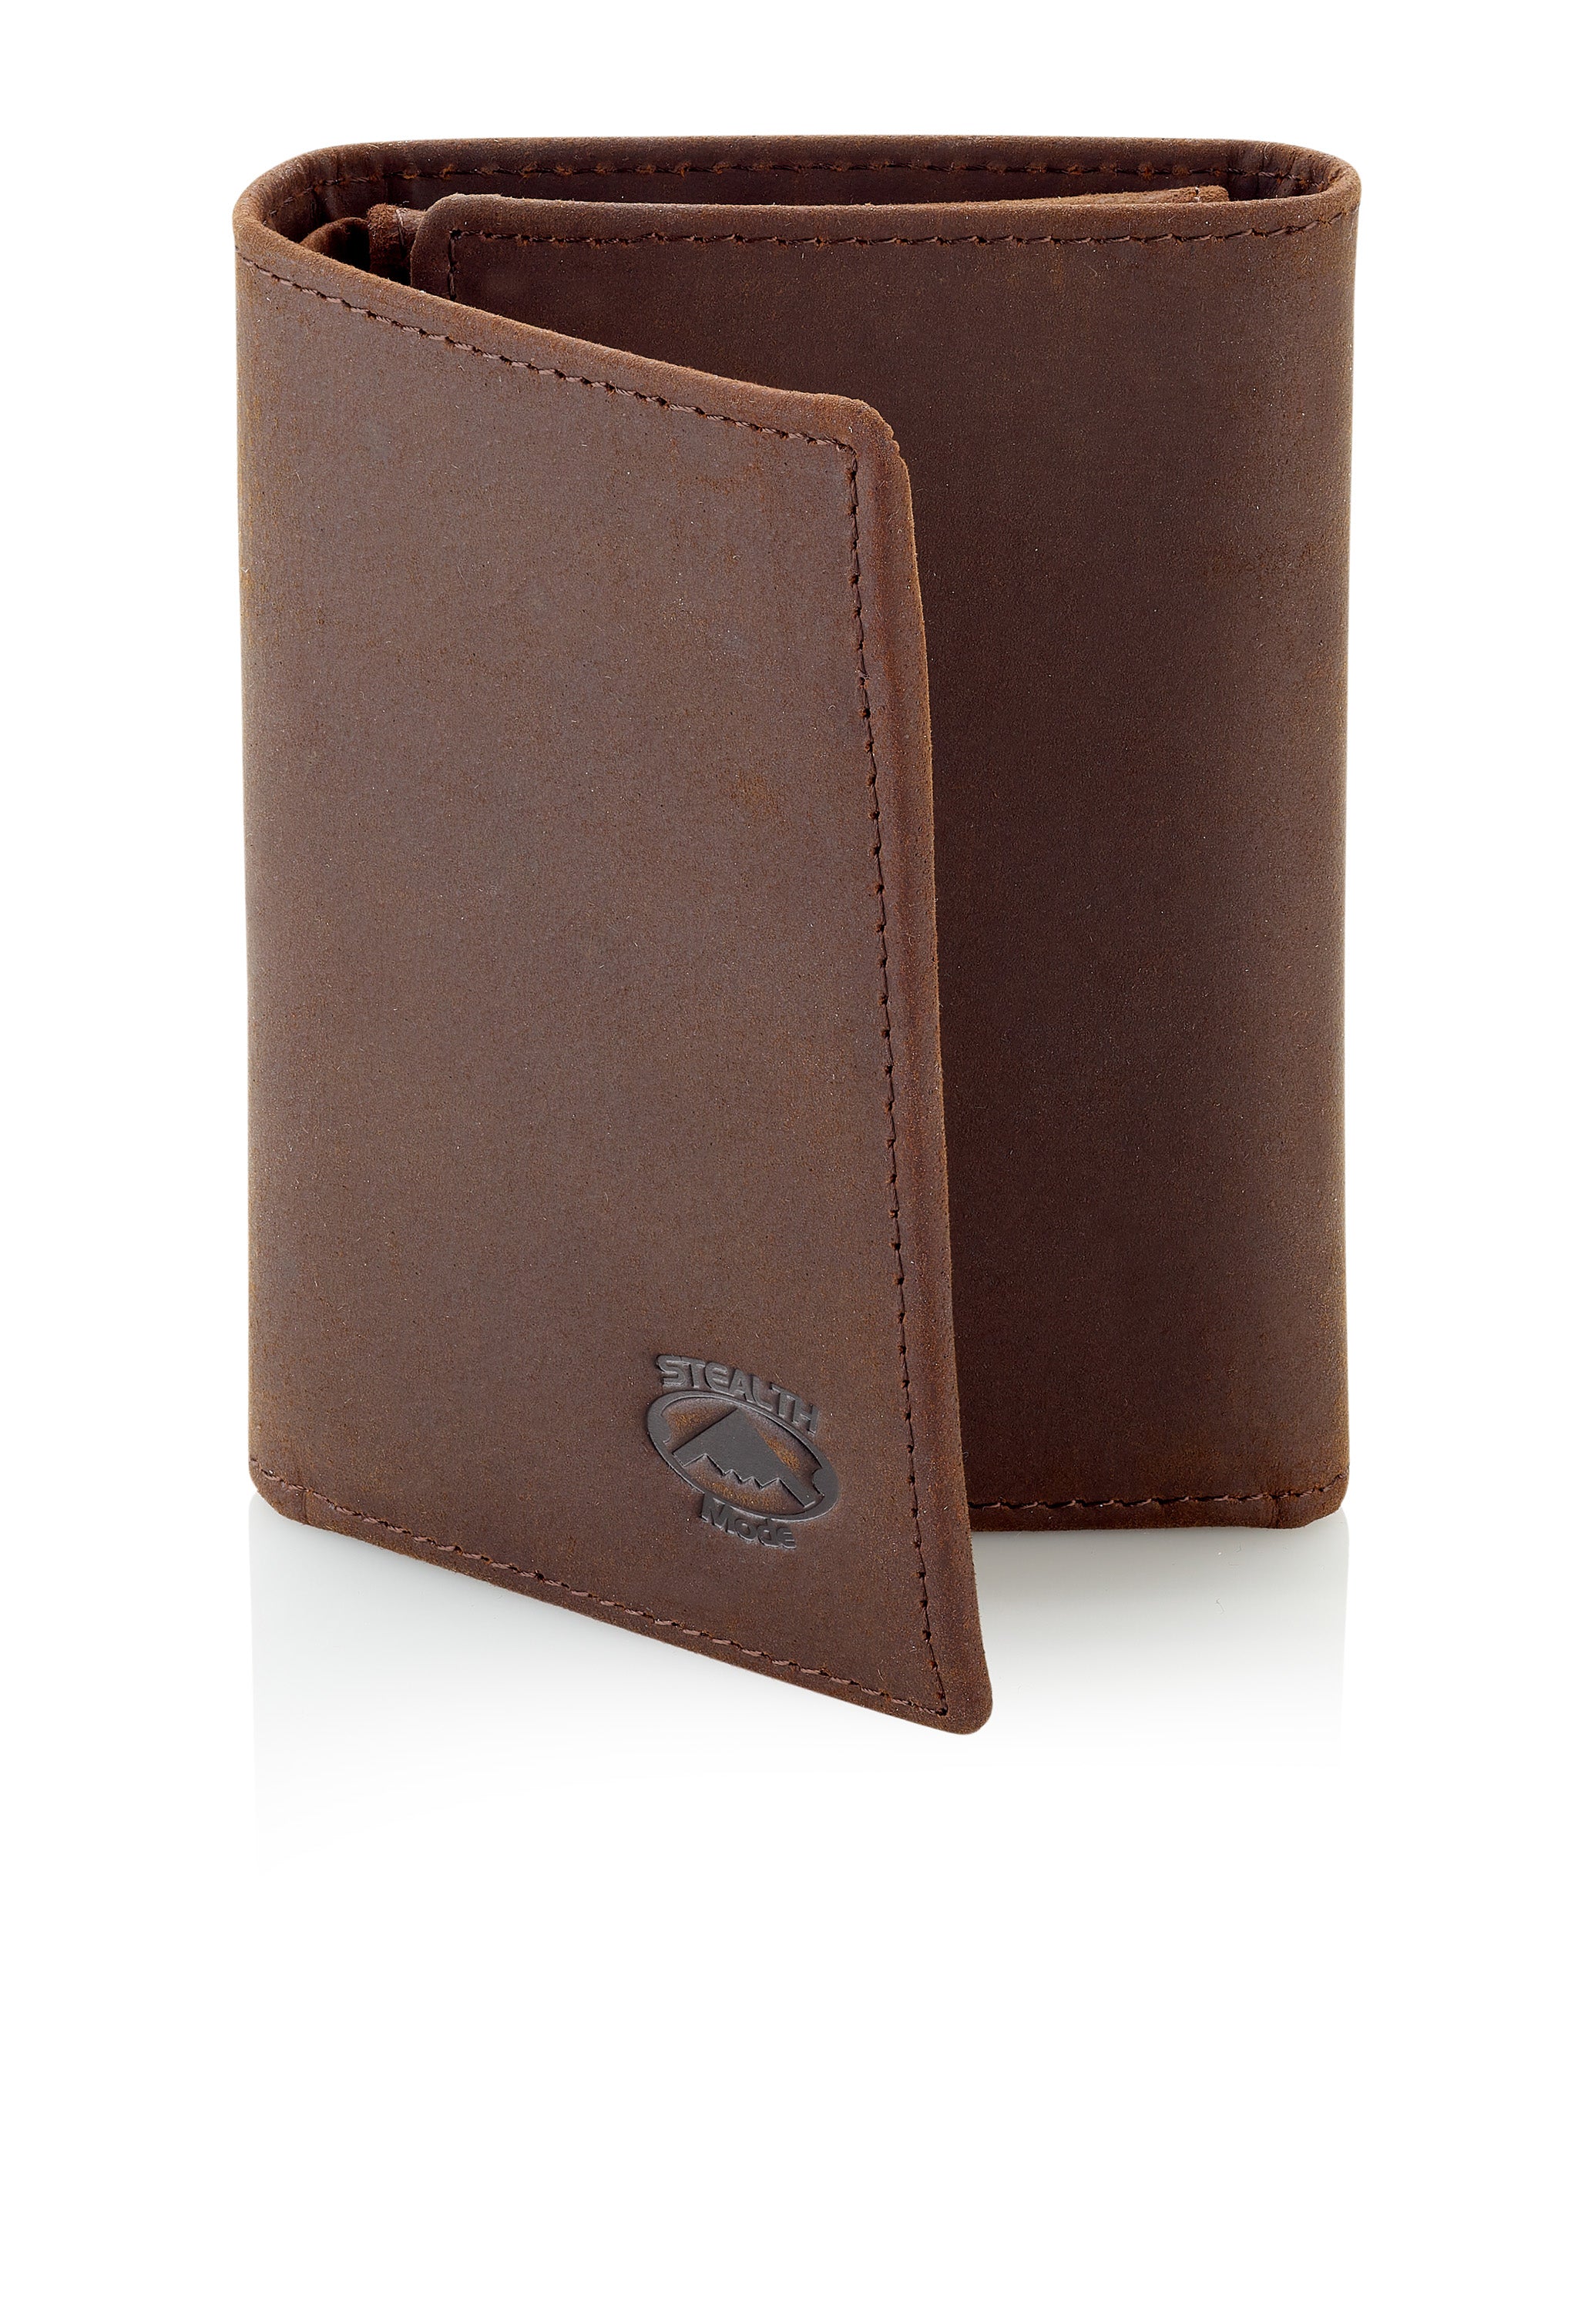 Trifold Leather Wallet for Men with ID Holder and RFID Blocking (Brown)